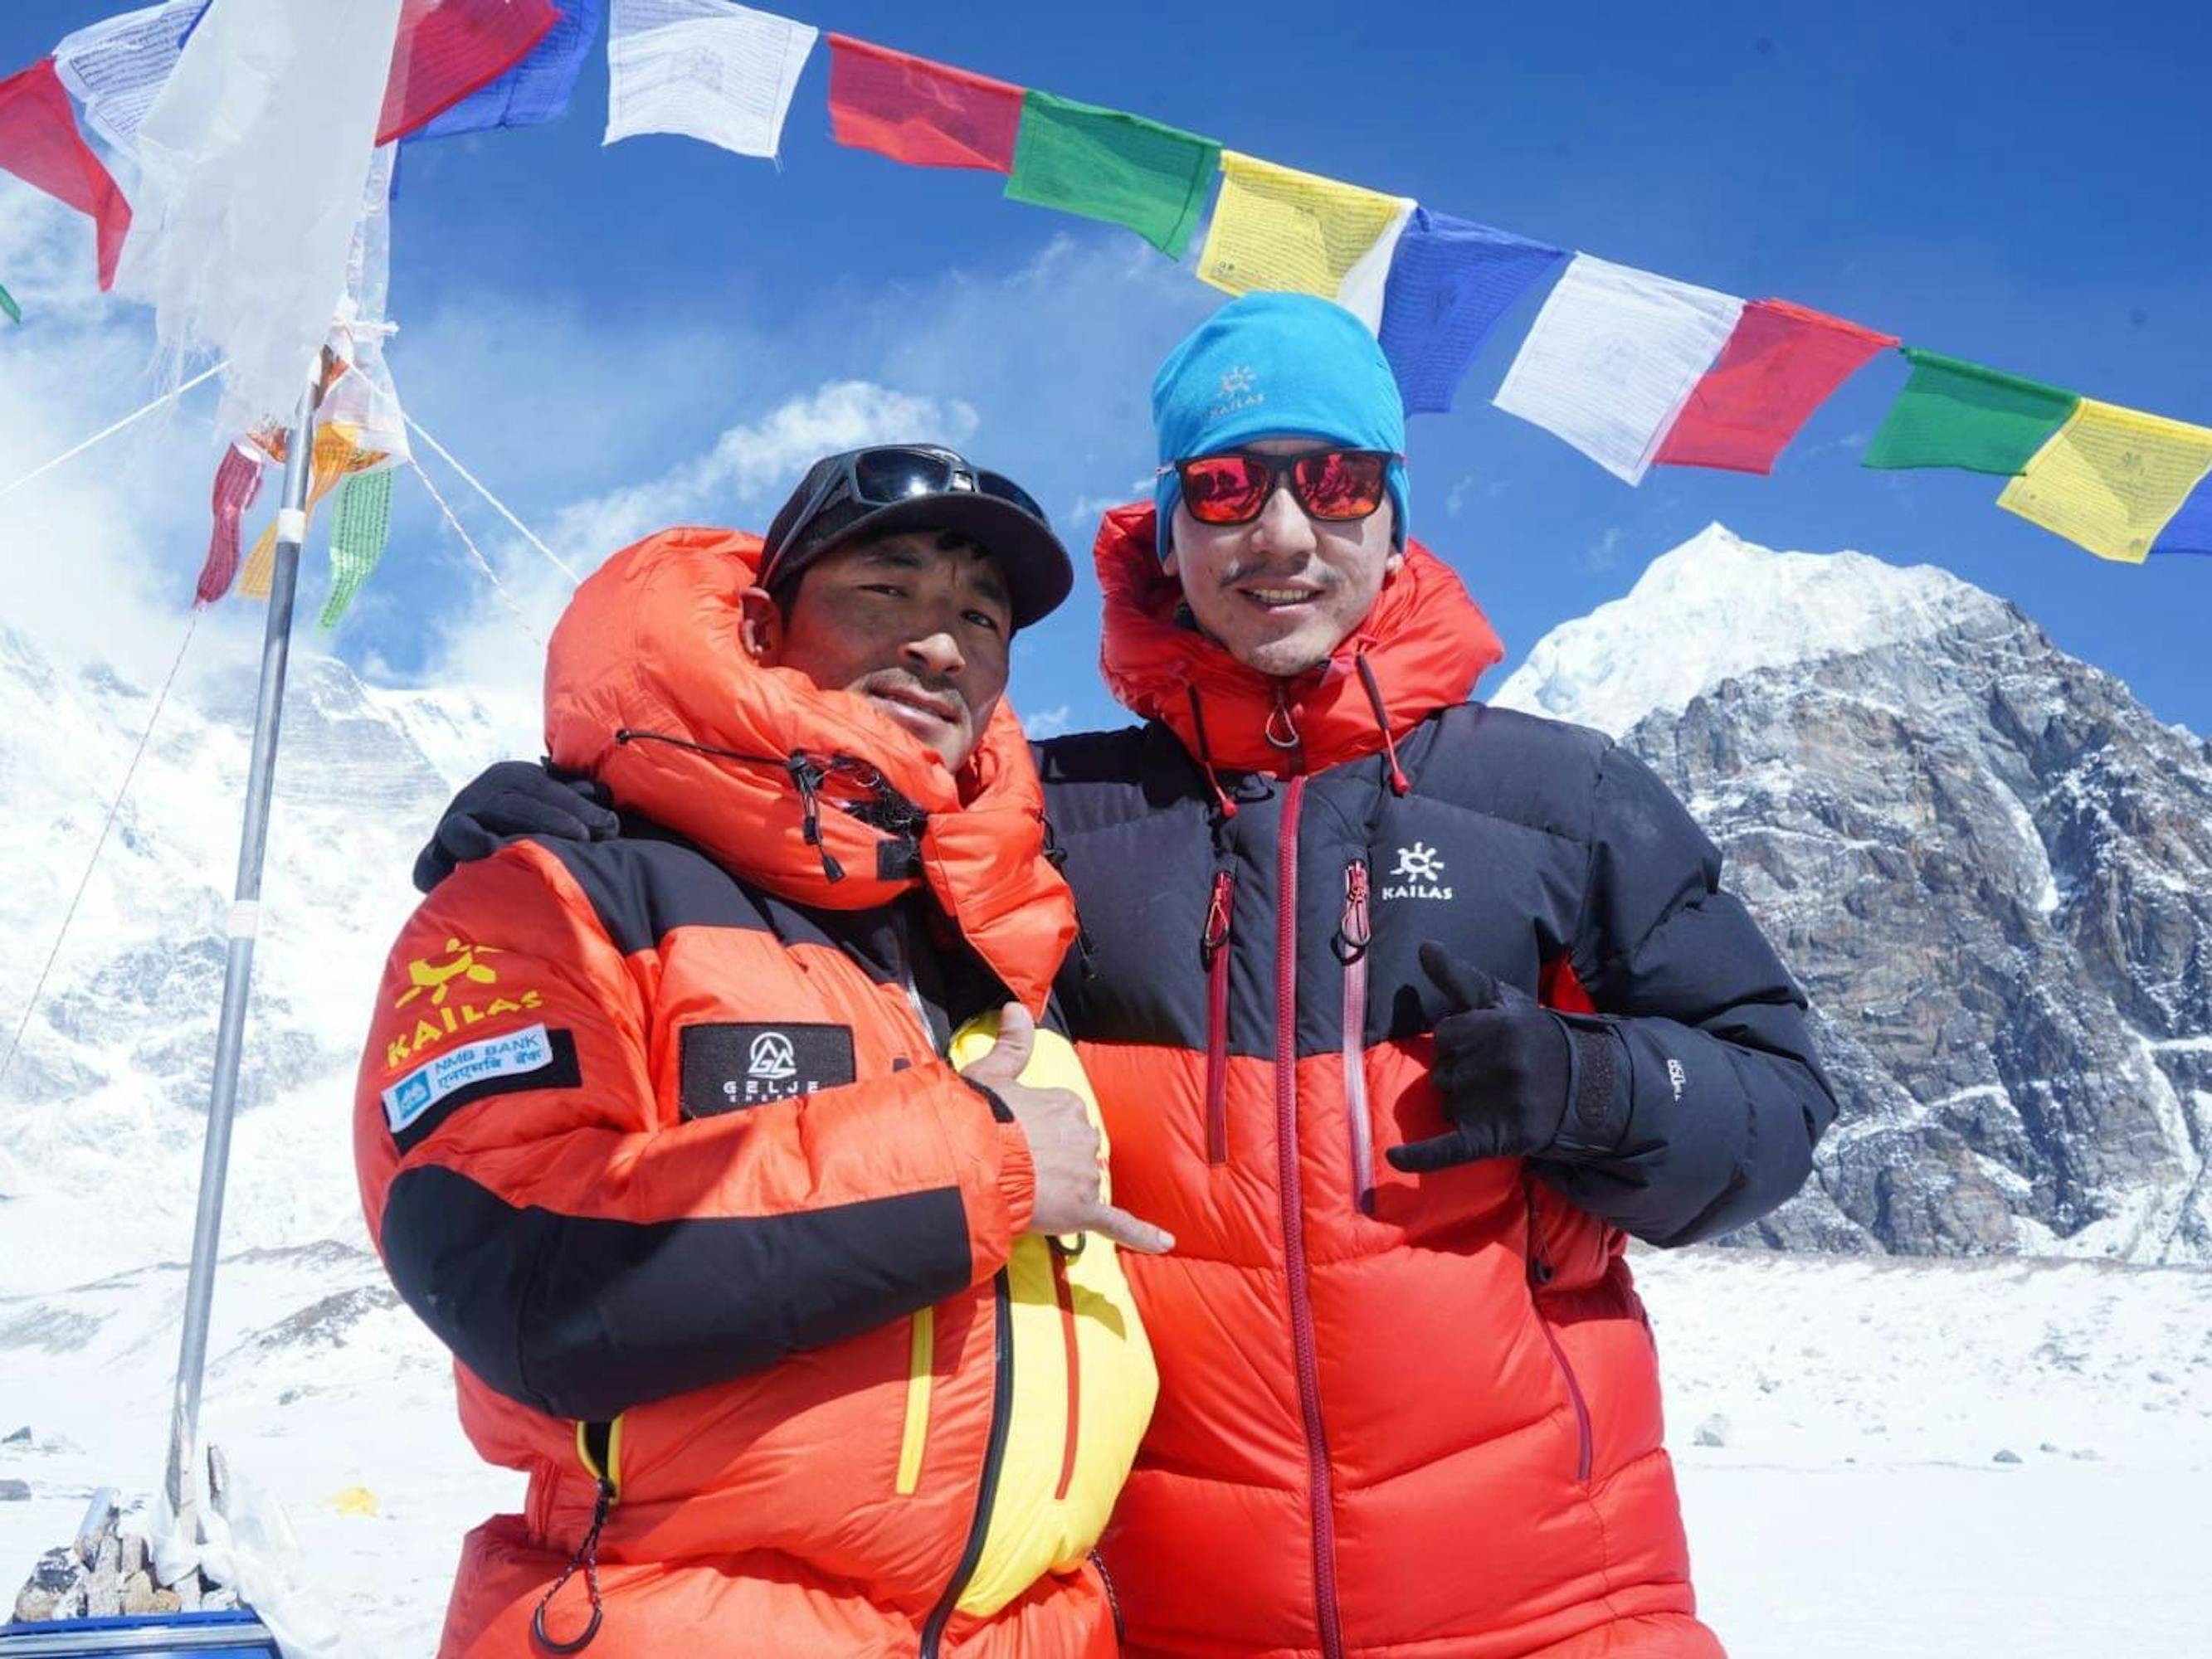 Geljen Sherpa wears orange and stands against a blue sky dotted with flags. 